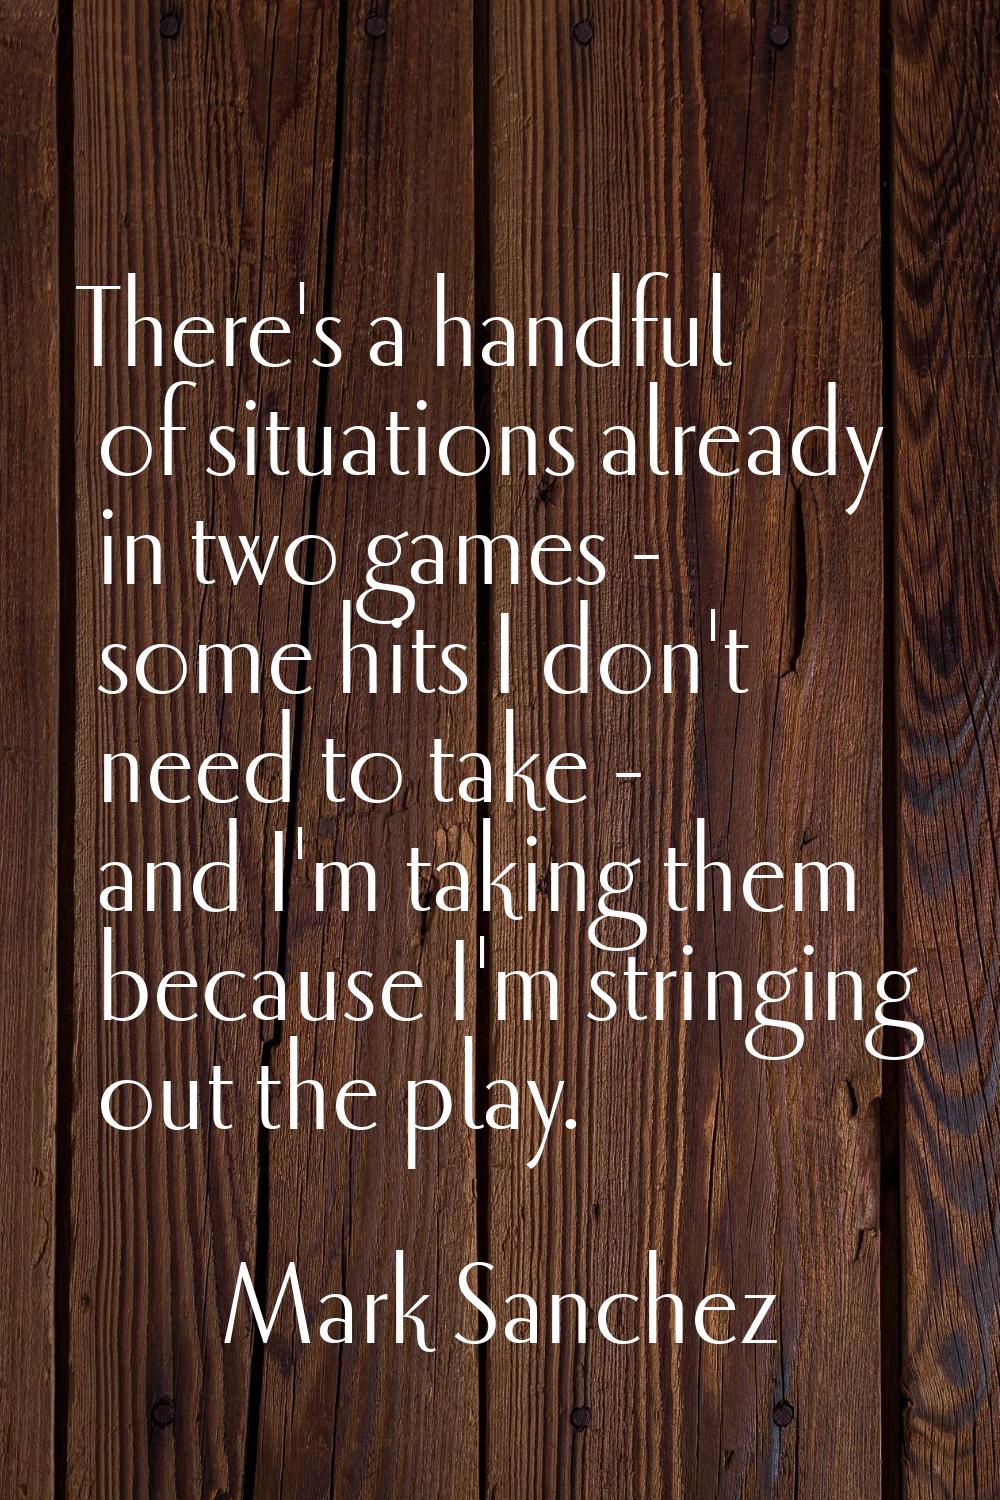 There's a handful of situations already in two games - some hits I don't need to take - and I'm tak